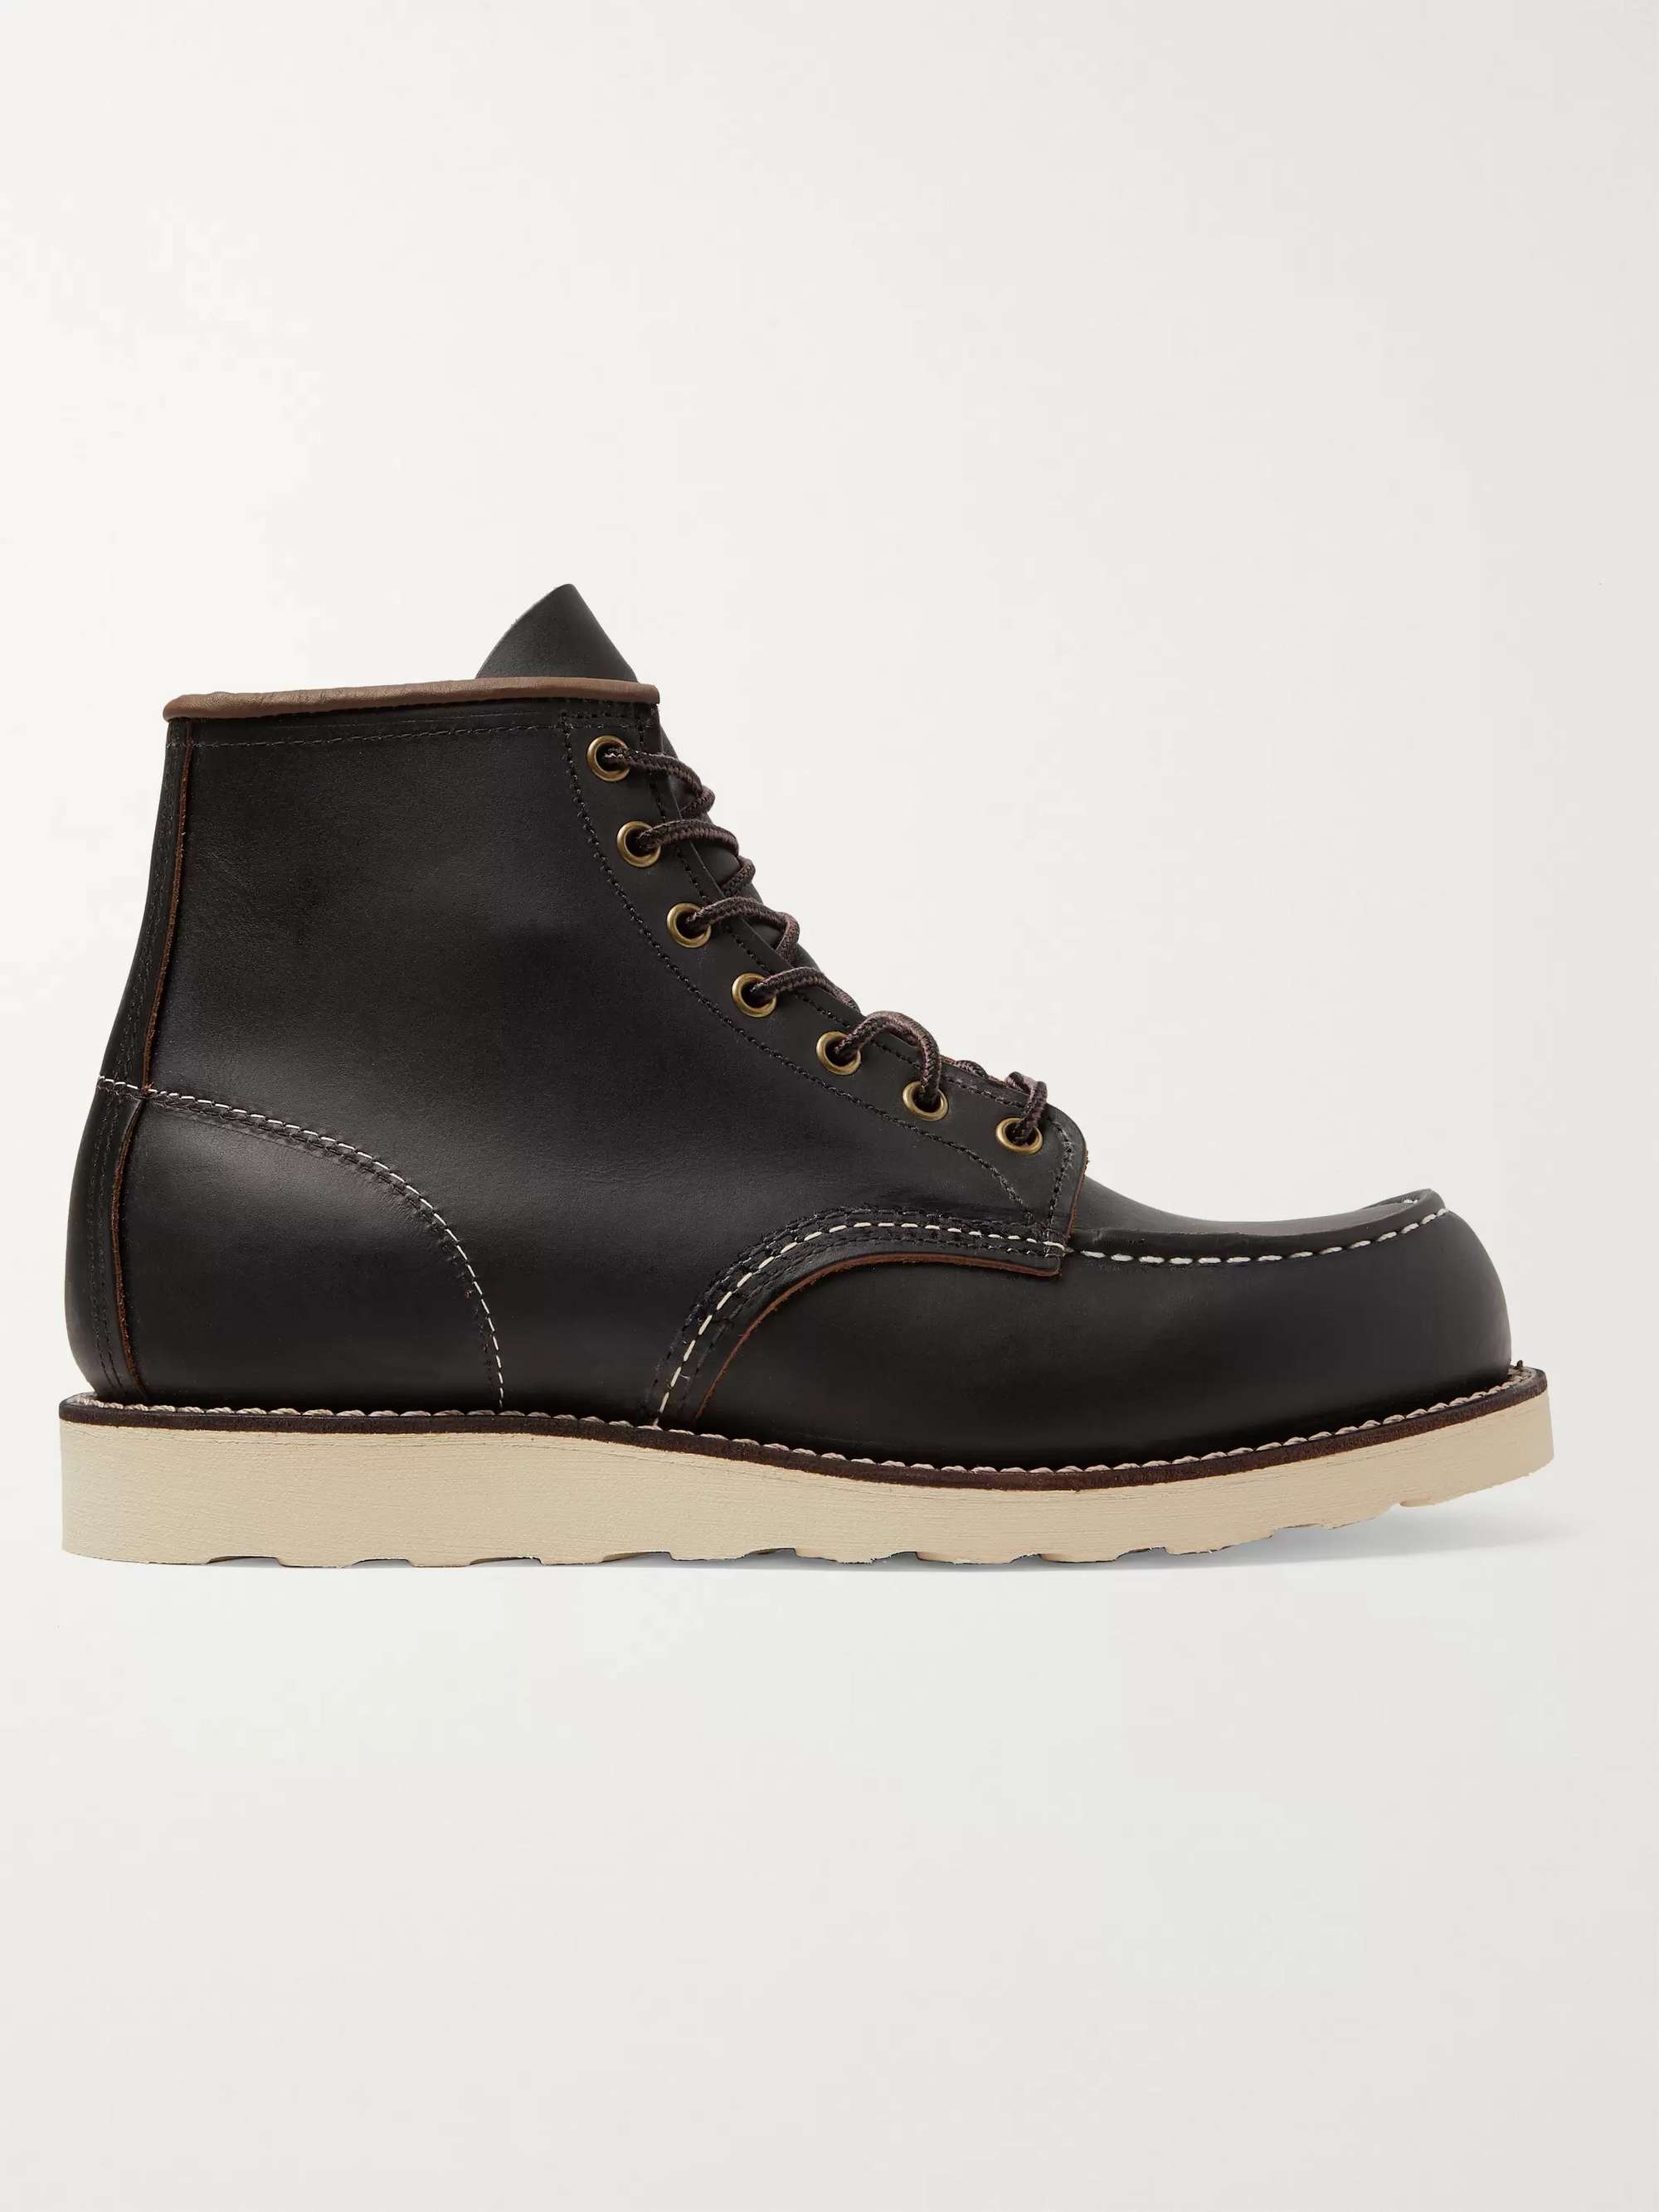 RED WING SHOES 8849 6-Inch Moc Leather Boots for Men